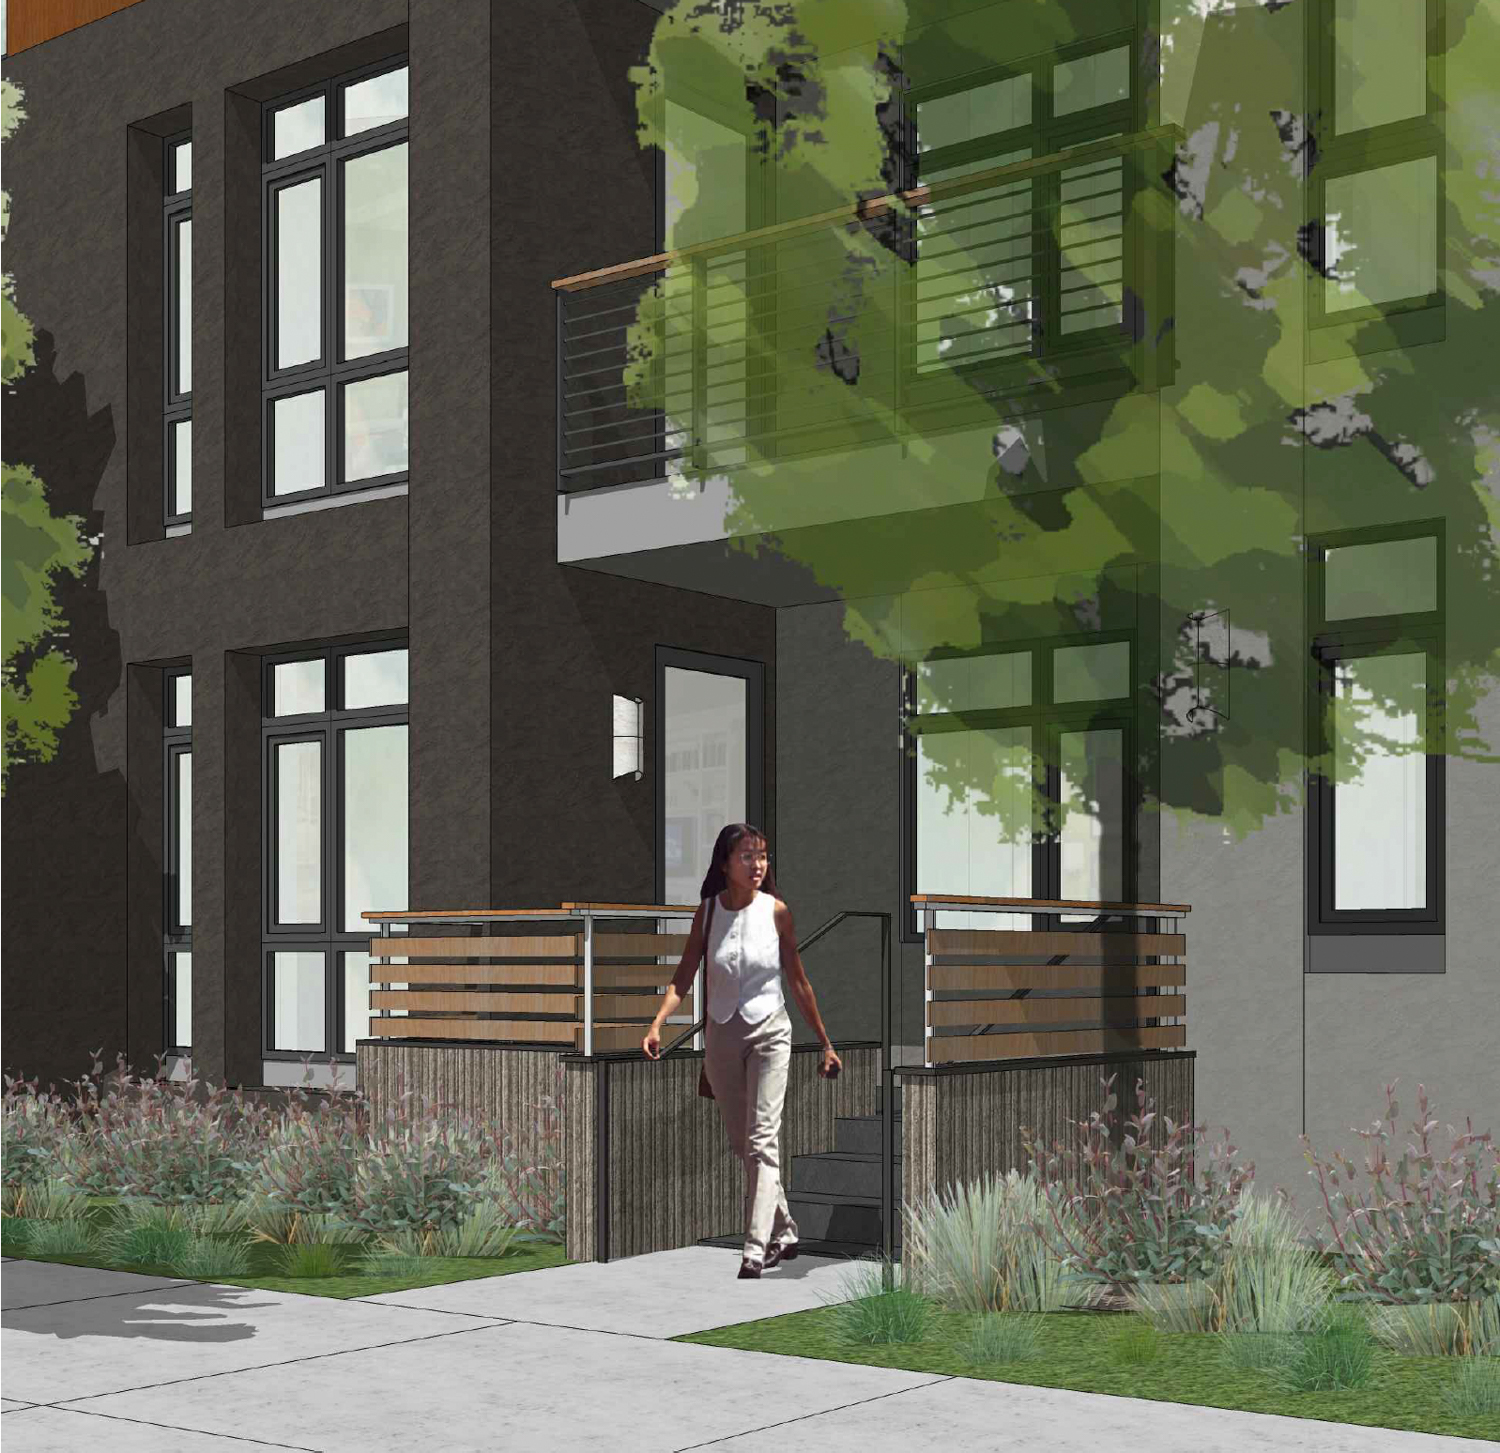 6700 Golden Gate Drive entry stoop for ground-level units, rendering by KTGY Architects